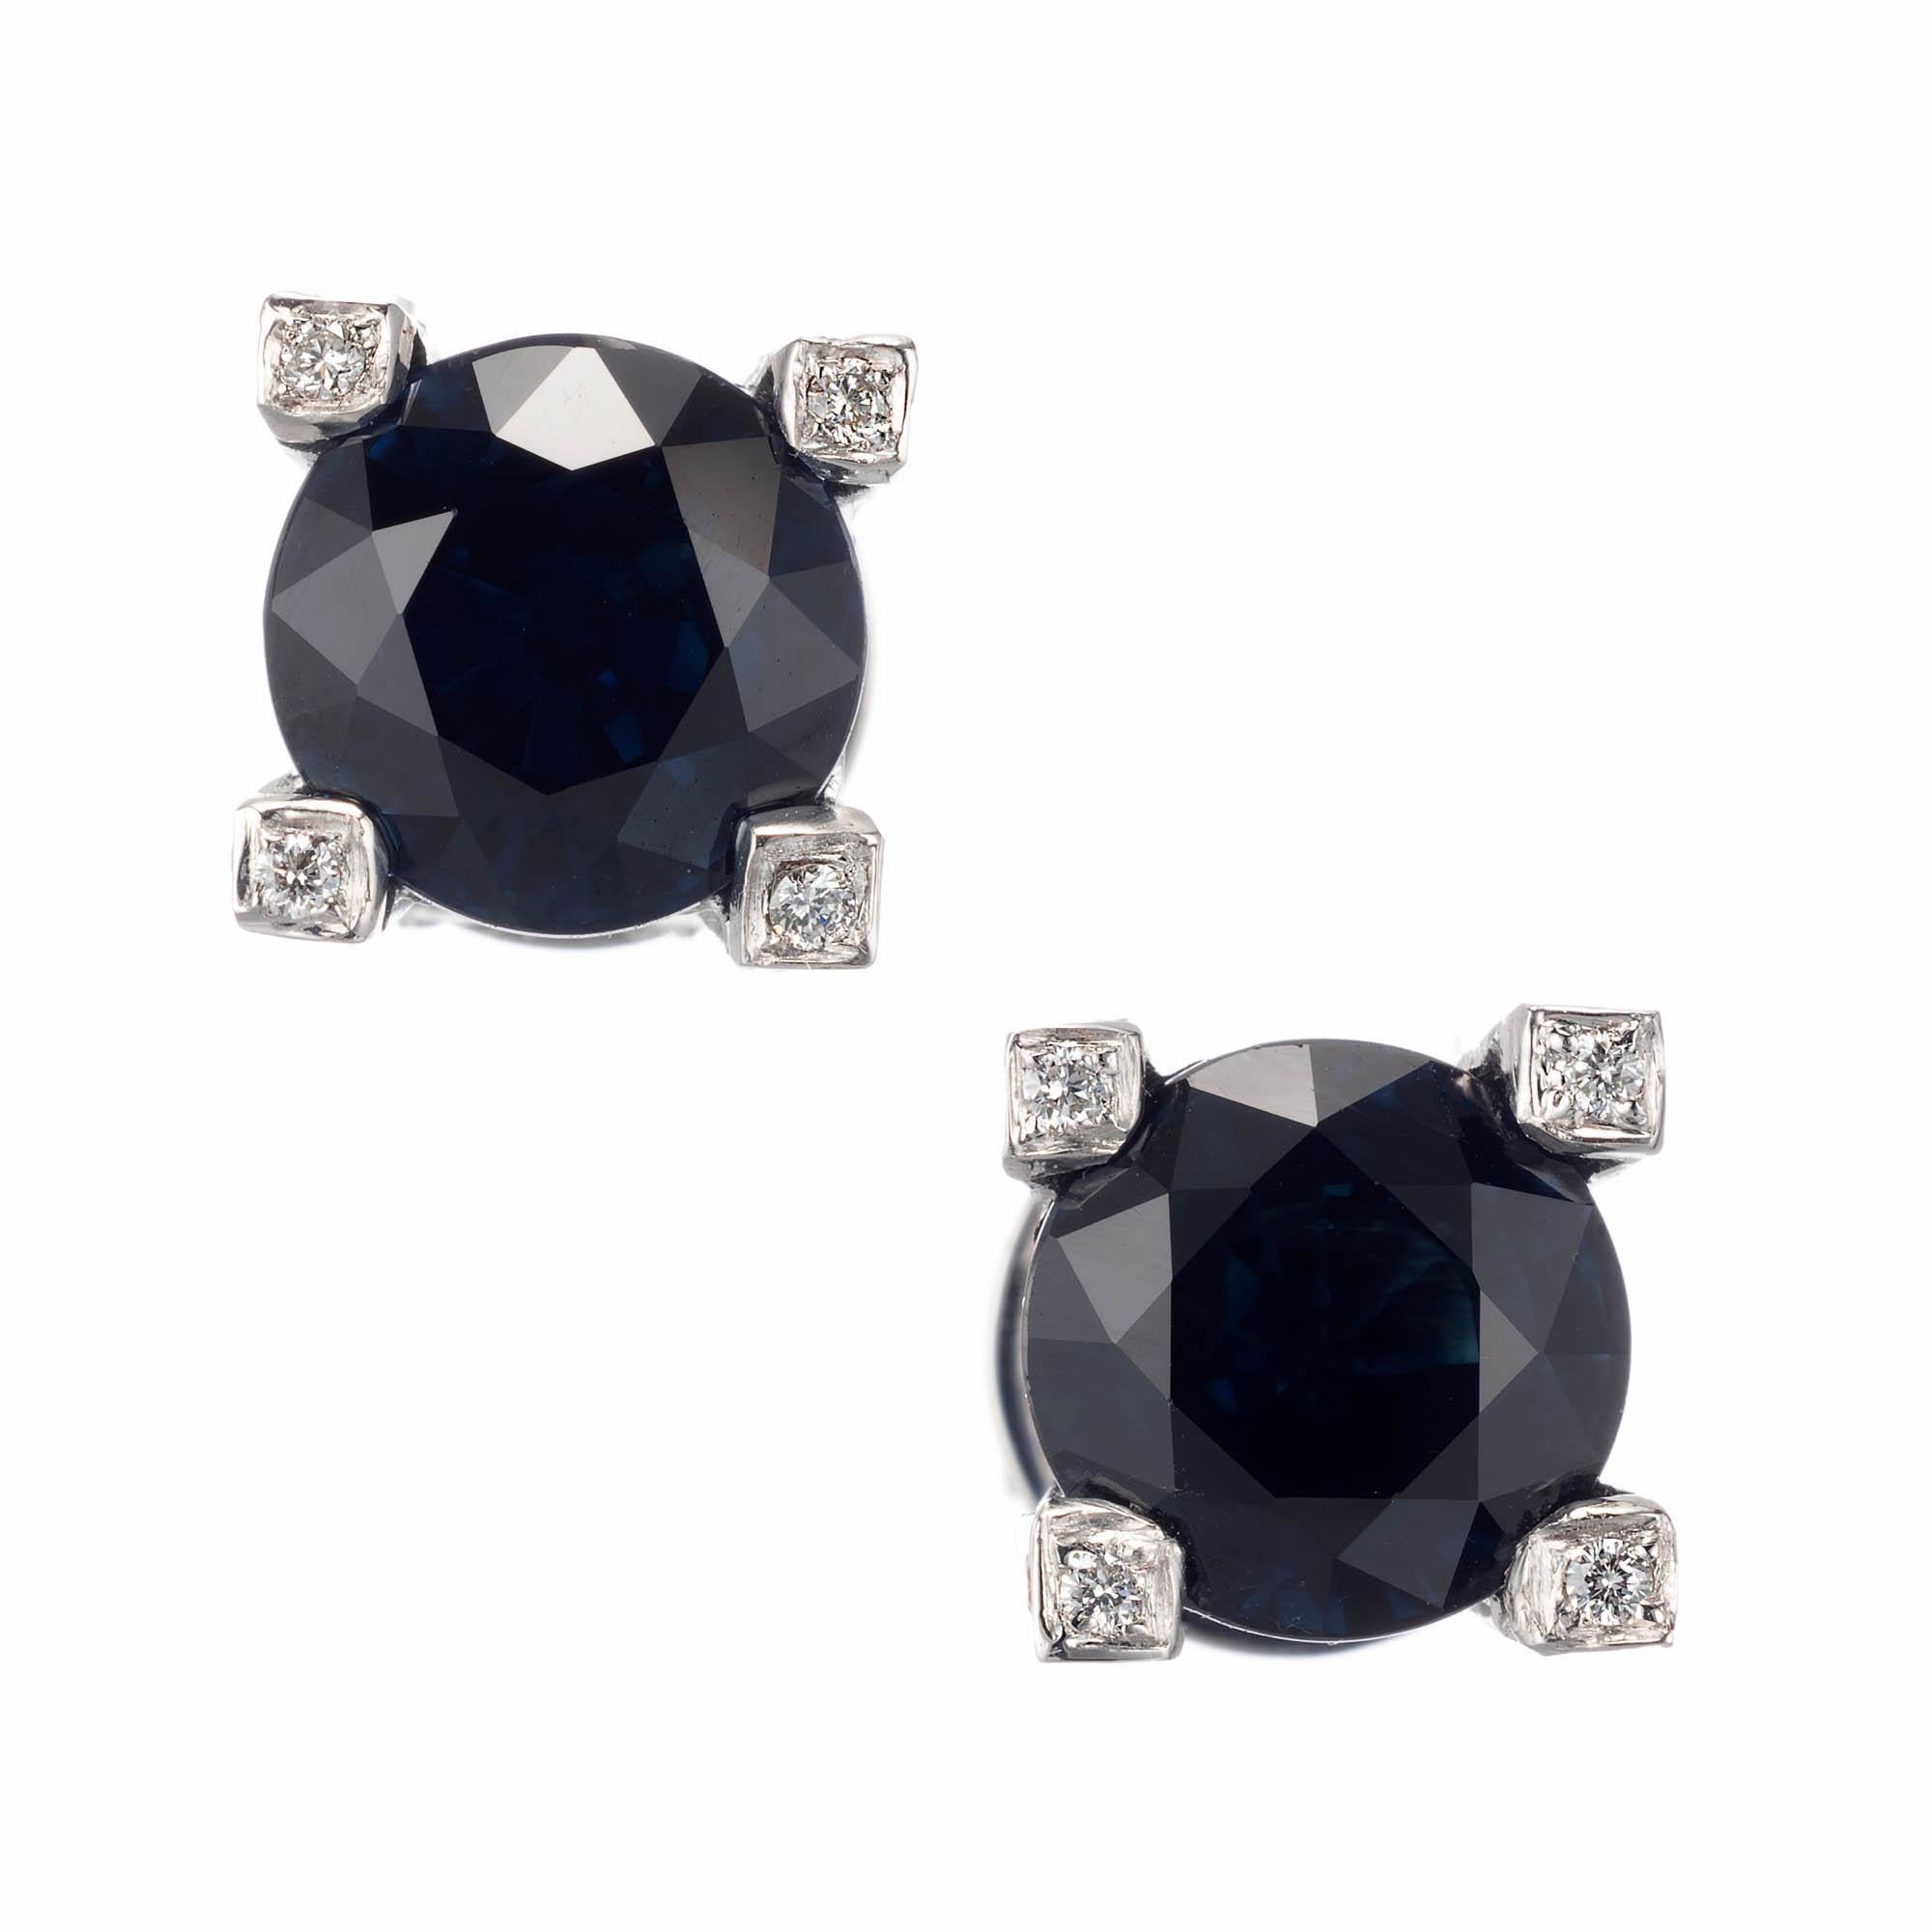 Peter Suchy GIA Certified 5.02 Carat Sapphire Diamond Stud Earrings For Sale